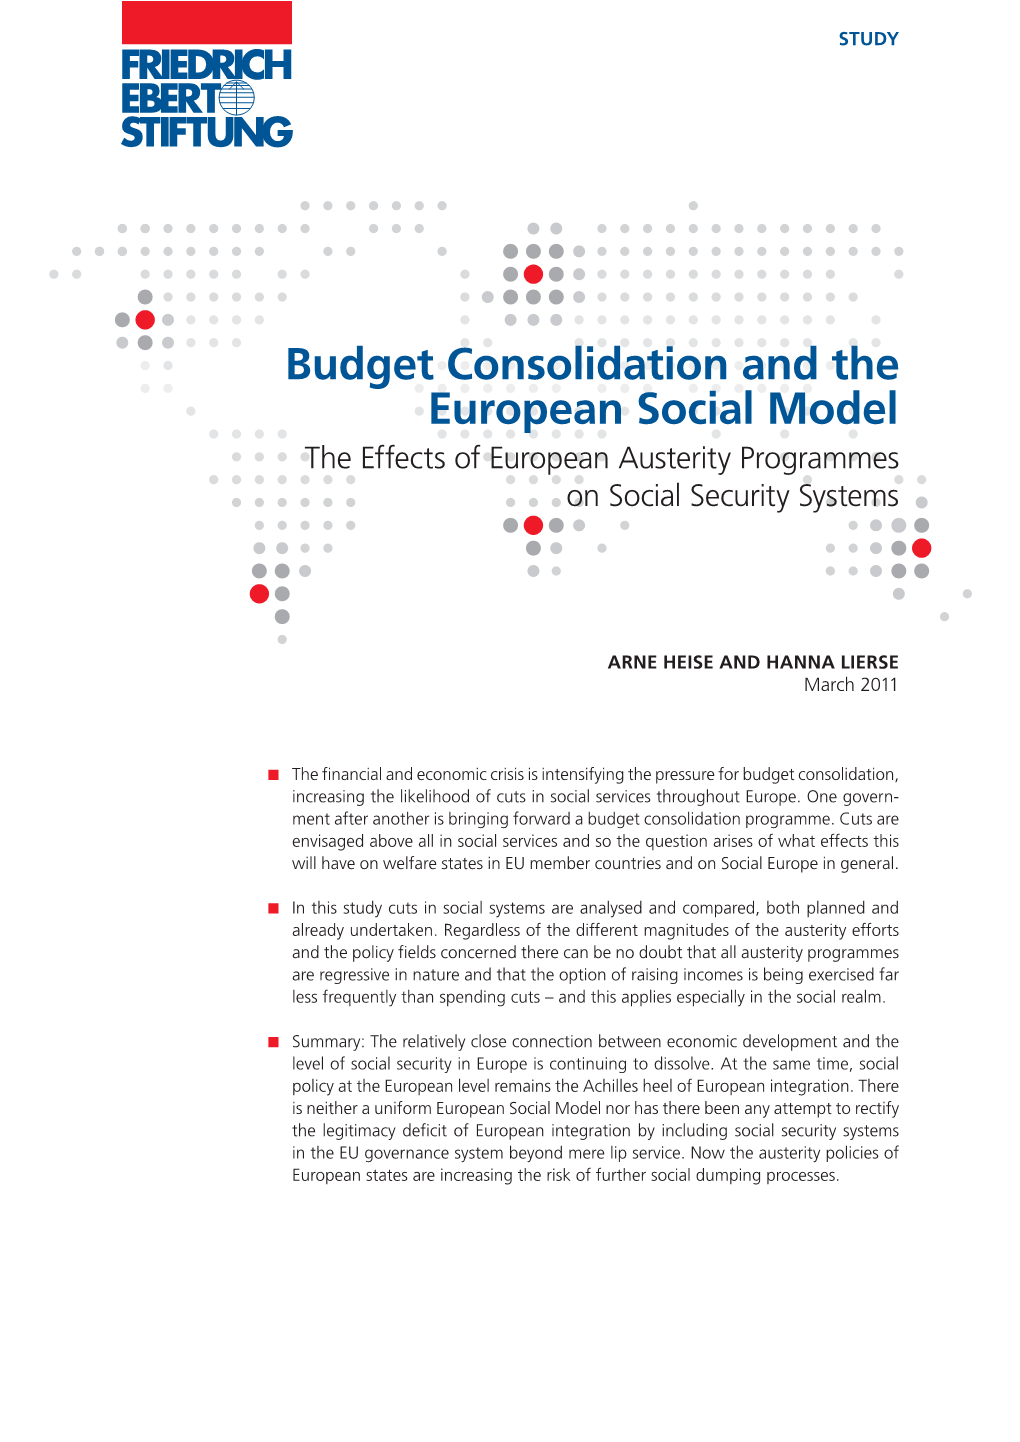 Budget Consolidation and the European Social Model : the Effects Of